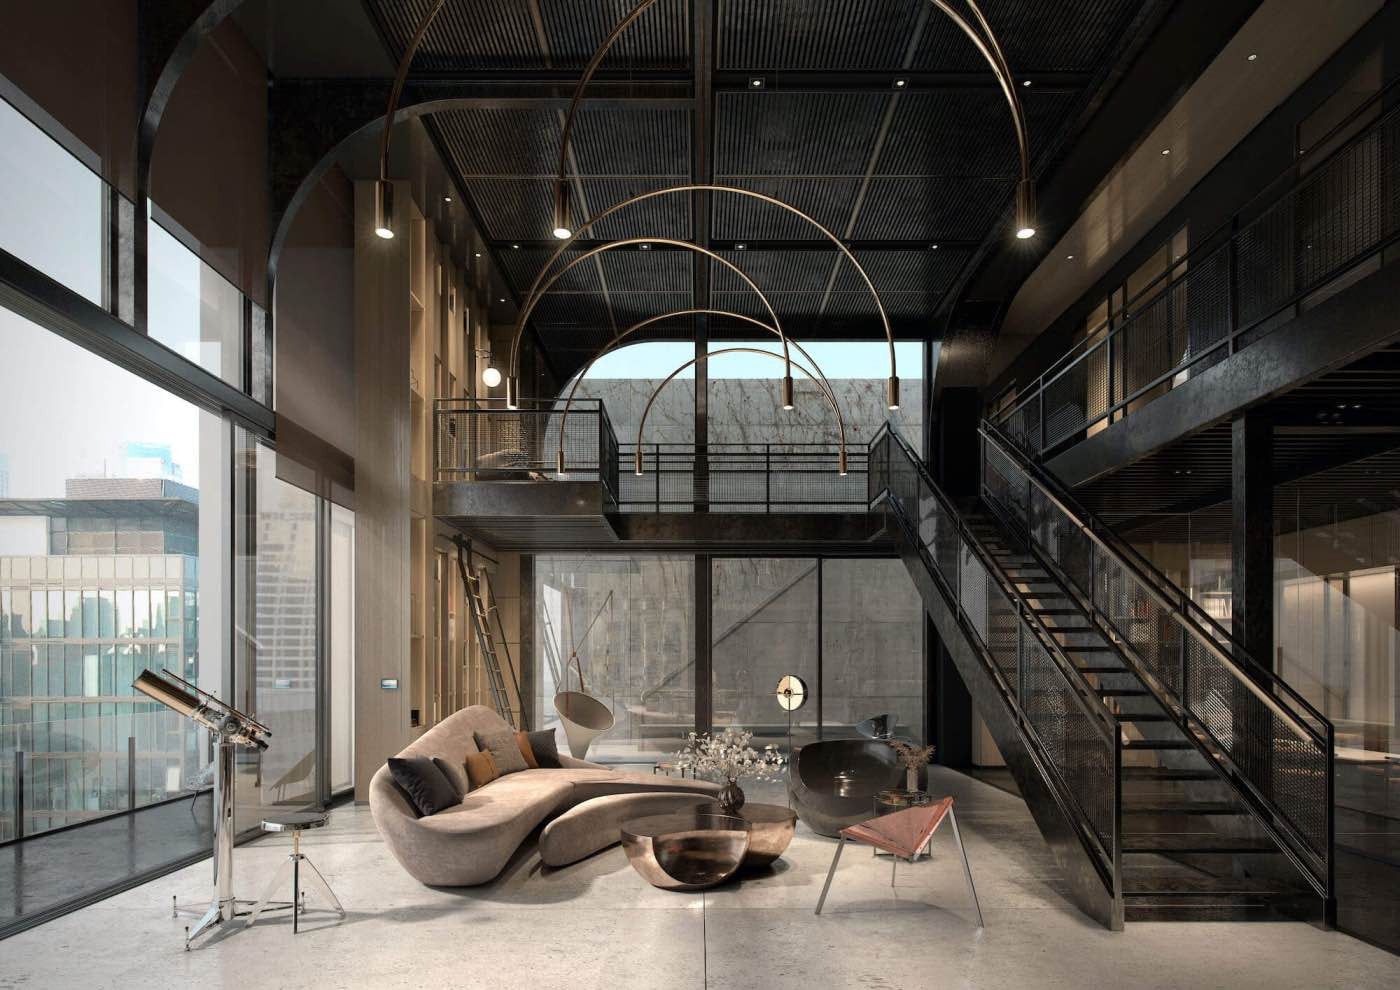 How to Achieve an Industrial Interior Design Look